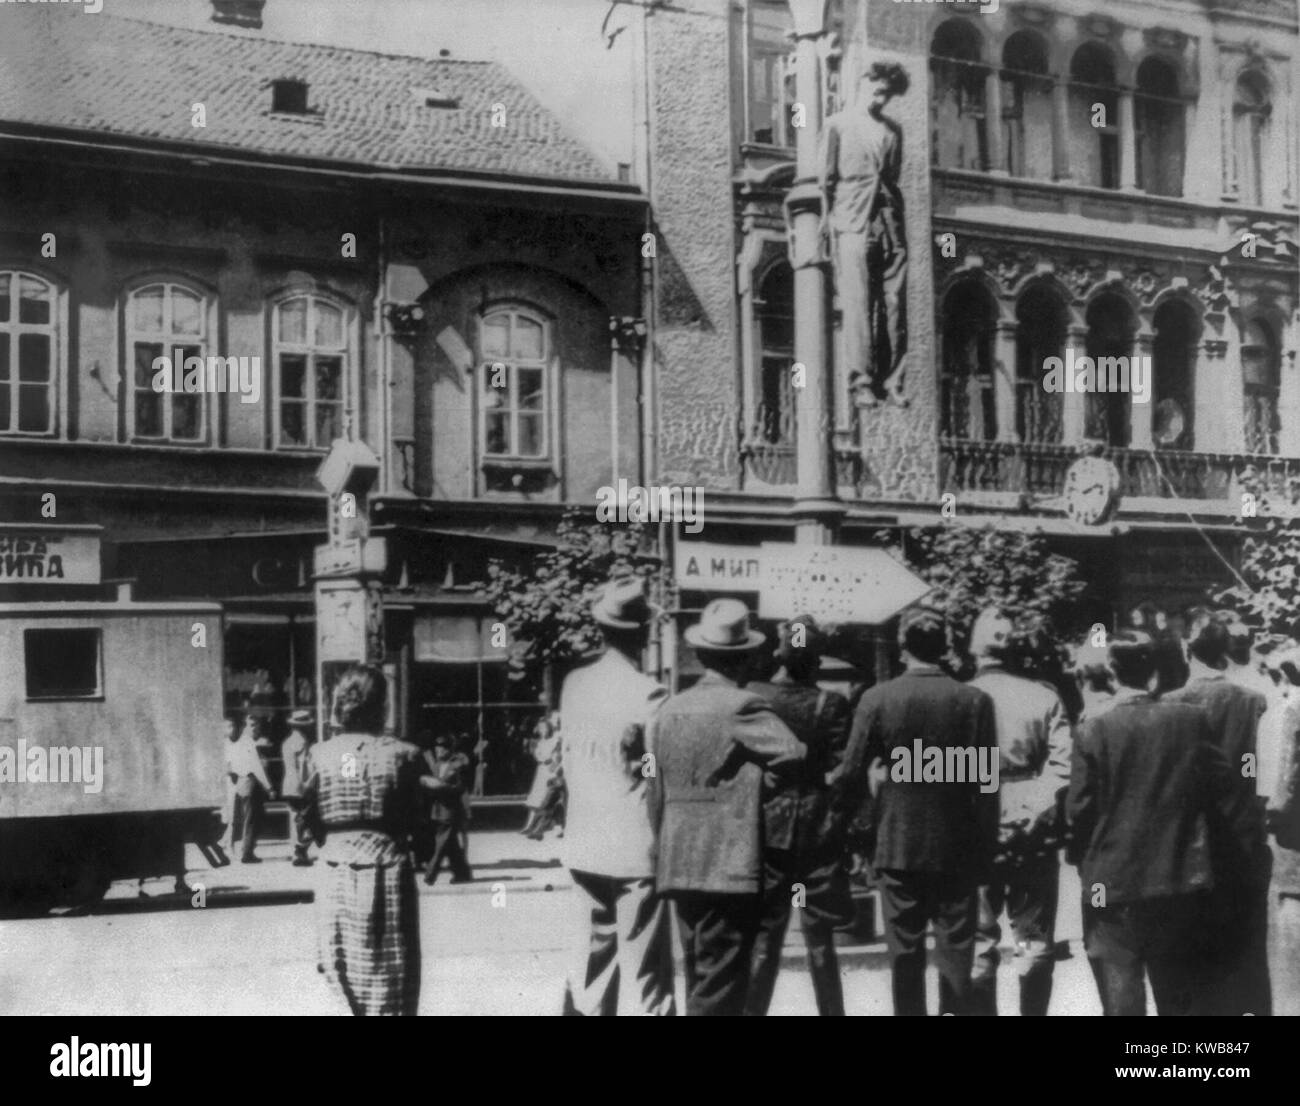 Public hanging of a Serbian martyr in a public square in Belgrade. The victim might one of the partisans who resisted the Fascist client regime. Ca. 1941-45, Yugoslavia, during World War 2. (BSLOC 2014 10 56) Stock Photo